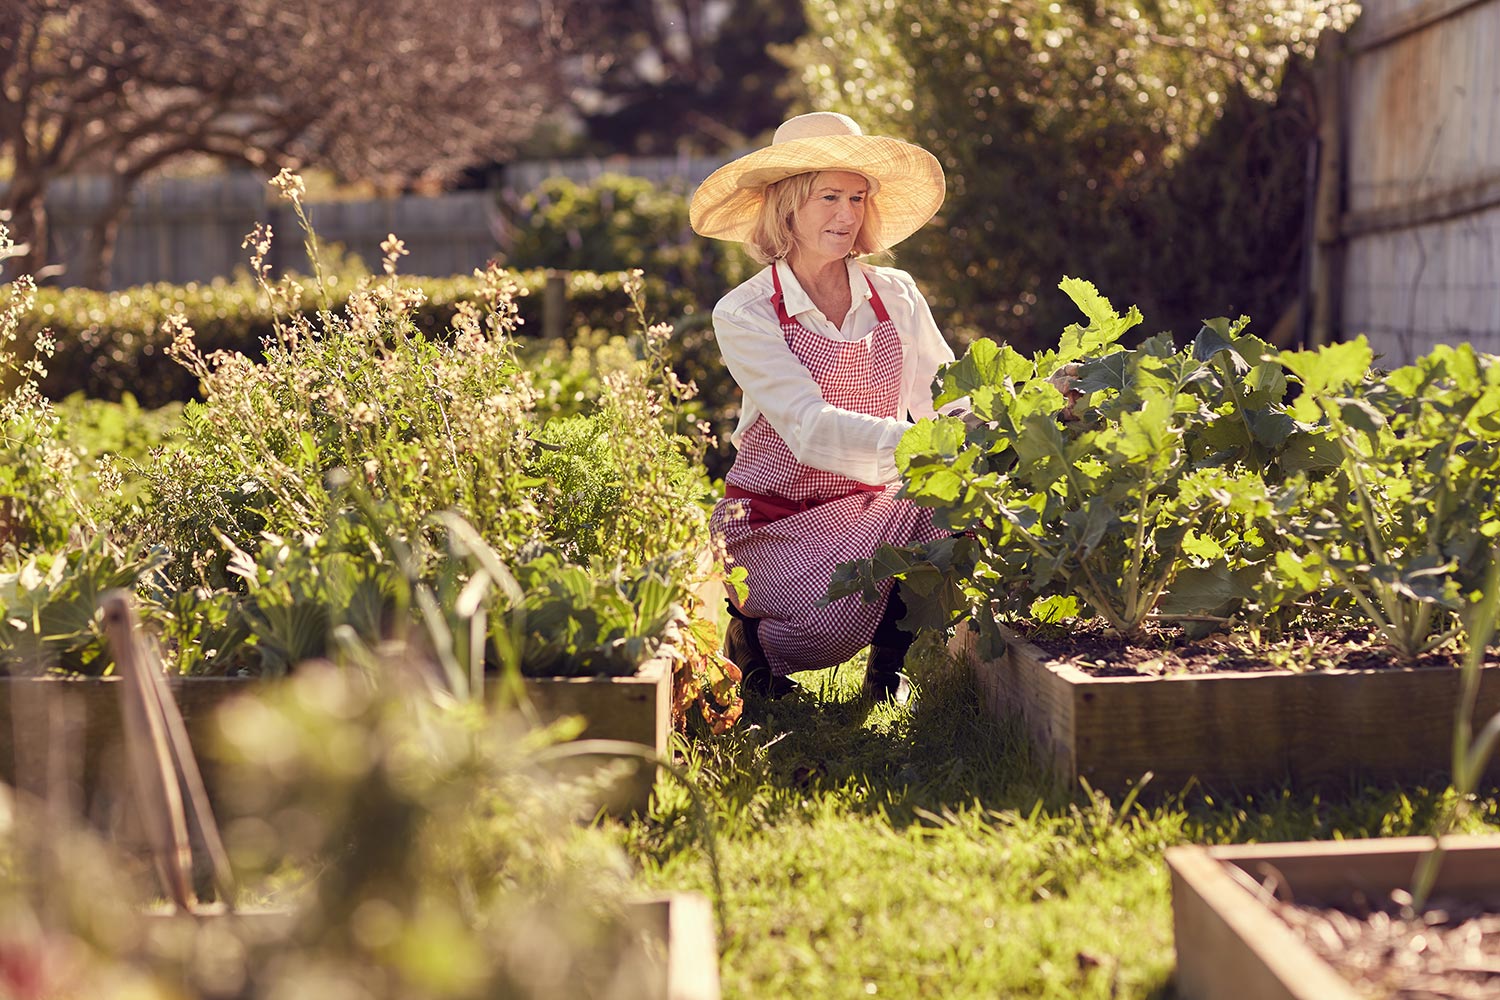 Senior woman among the raised beds in her vegetable garden checking on the quality of the food being produced